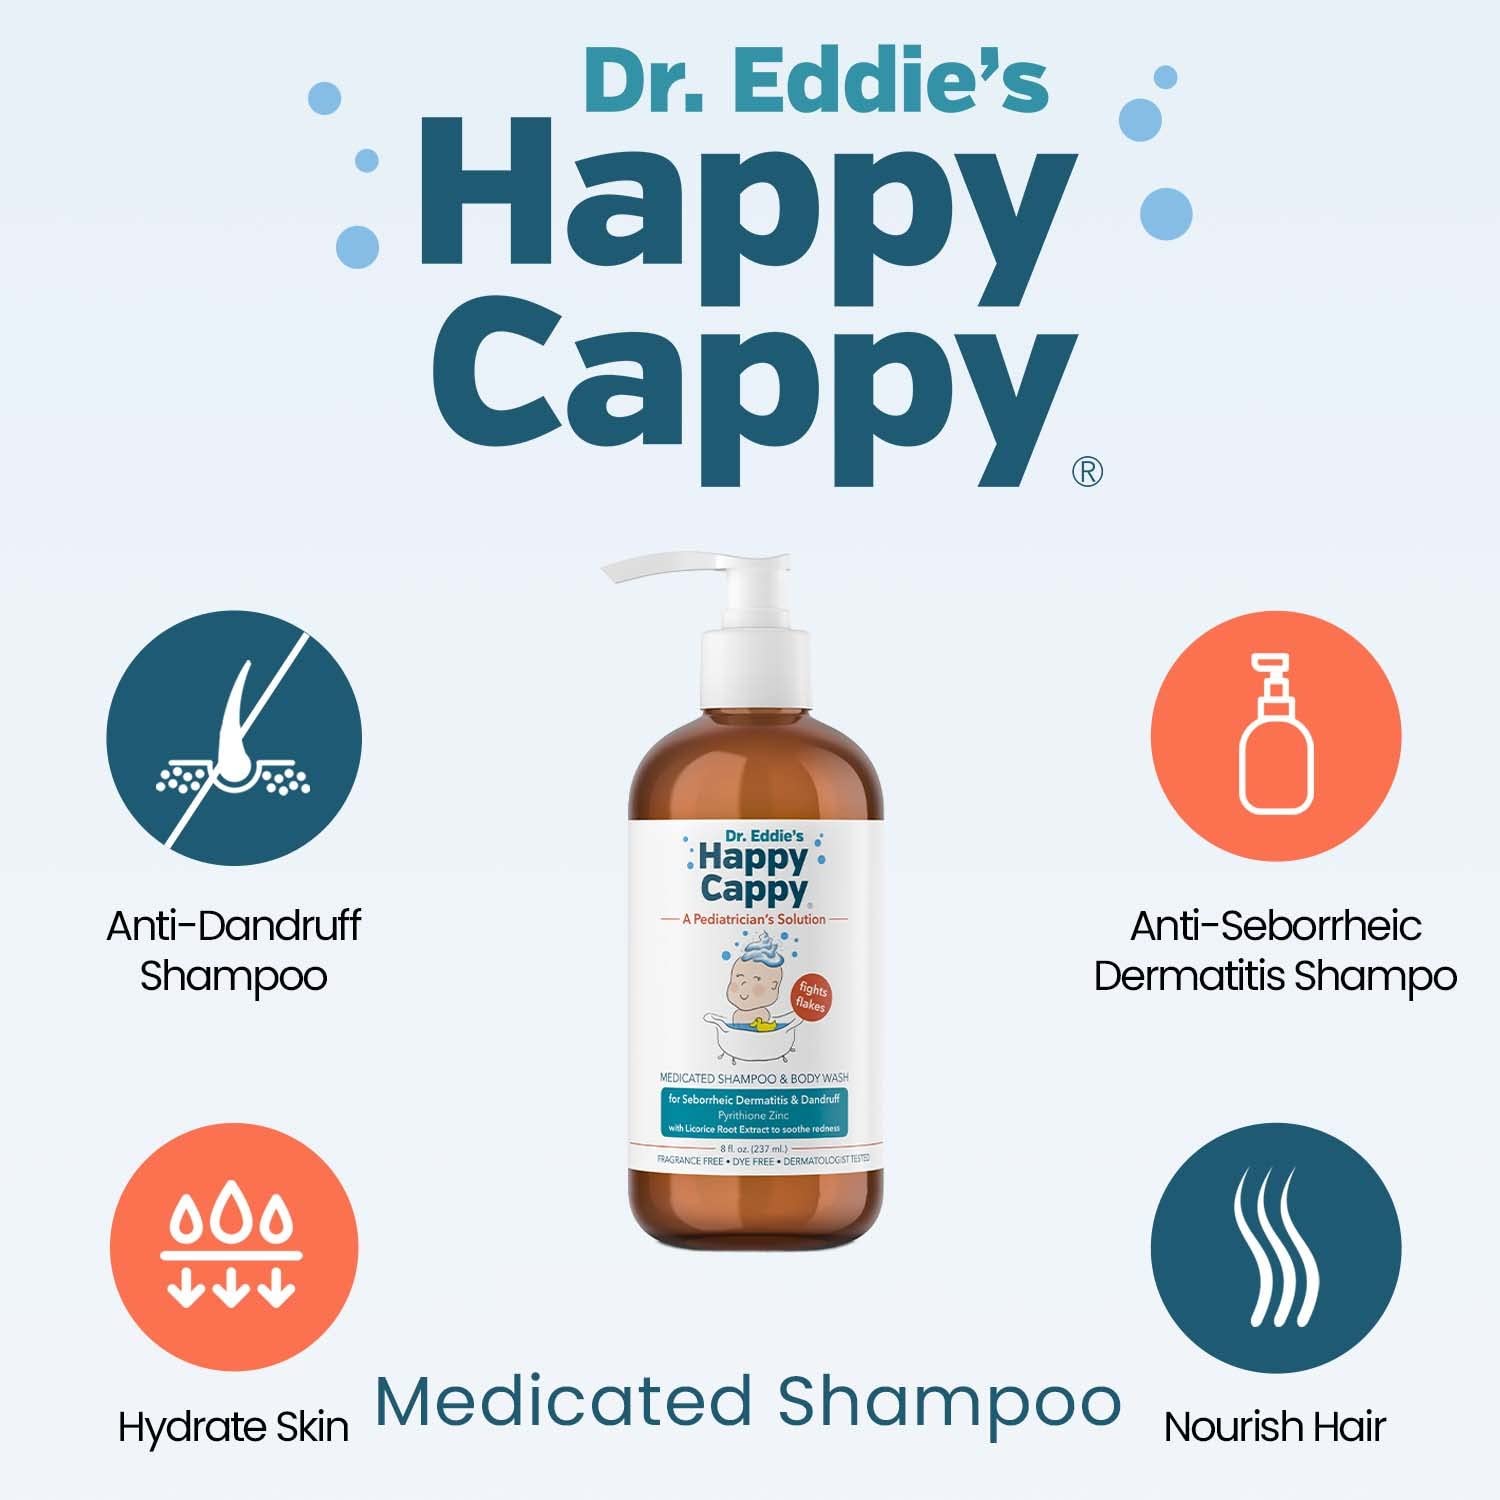 Happy Cappy Dr. Eddie’s Medicated Shampoo for Children, Treats Dandruff & Seborrheic Dermatitis, No Fragrance, Stops Flakes and Redness on Sensitive Scalps and Skin, Cradle Cap Brush Not Needed, 8 oz